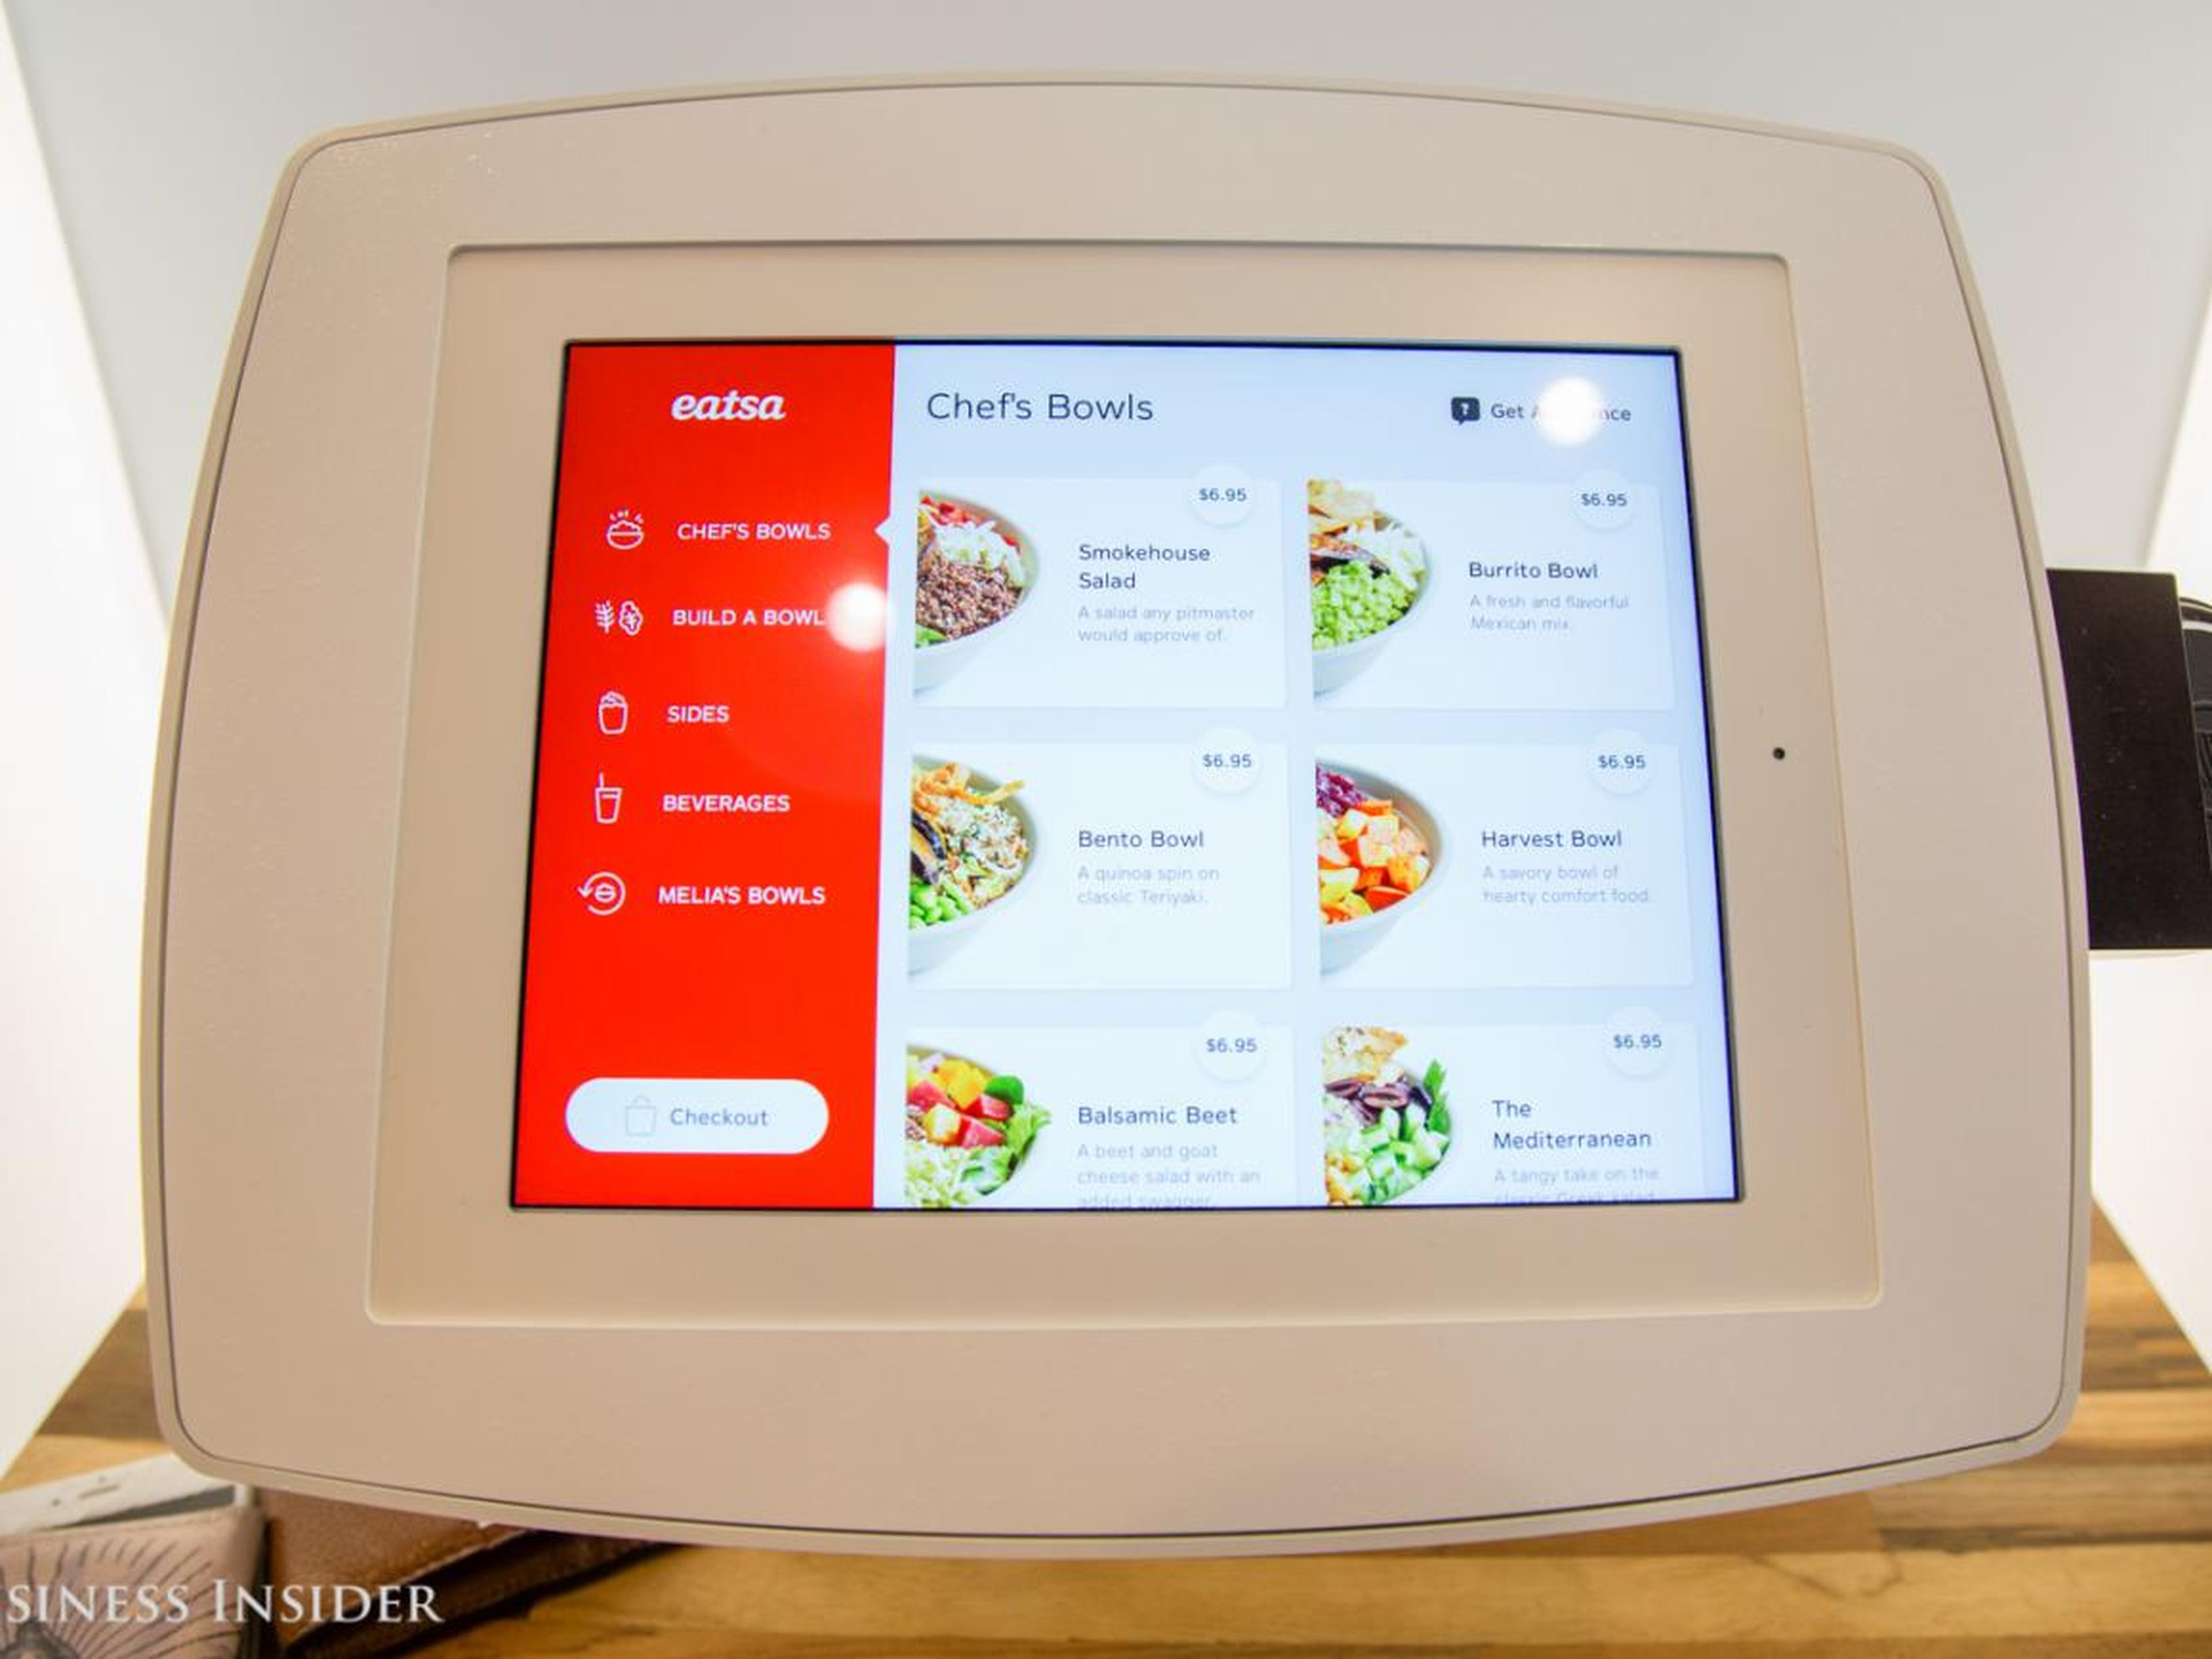 The process was similar at Eatsa — you ordered via a tablet. When Business Insider's Melia Russell visited in 2016, there were eight bowls to choose from, all priced around $7.